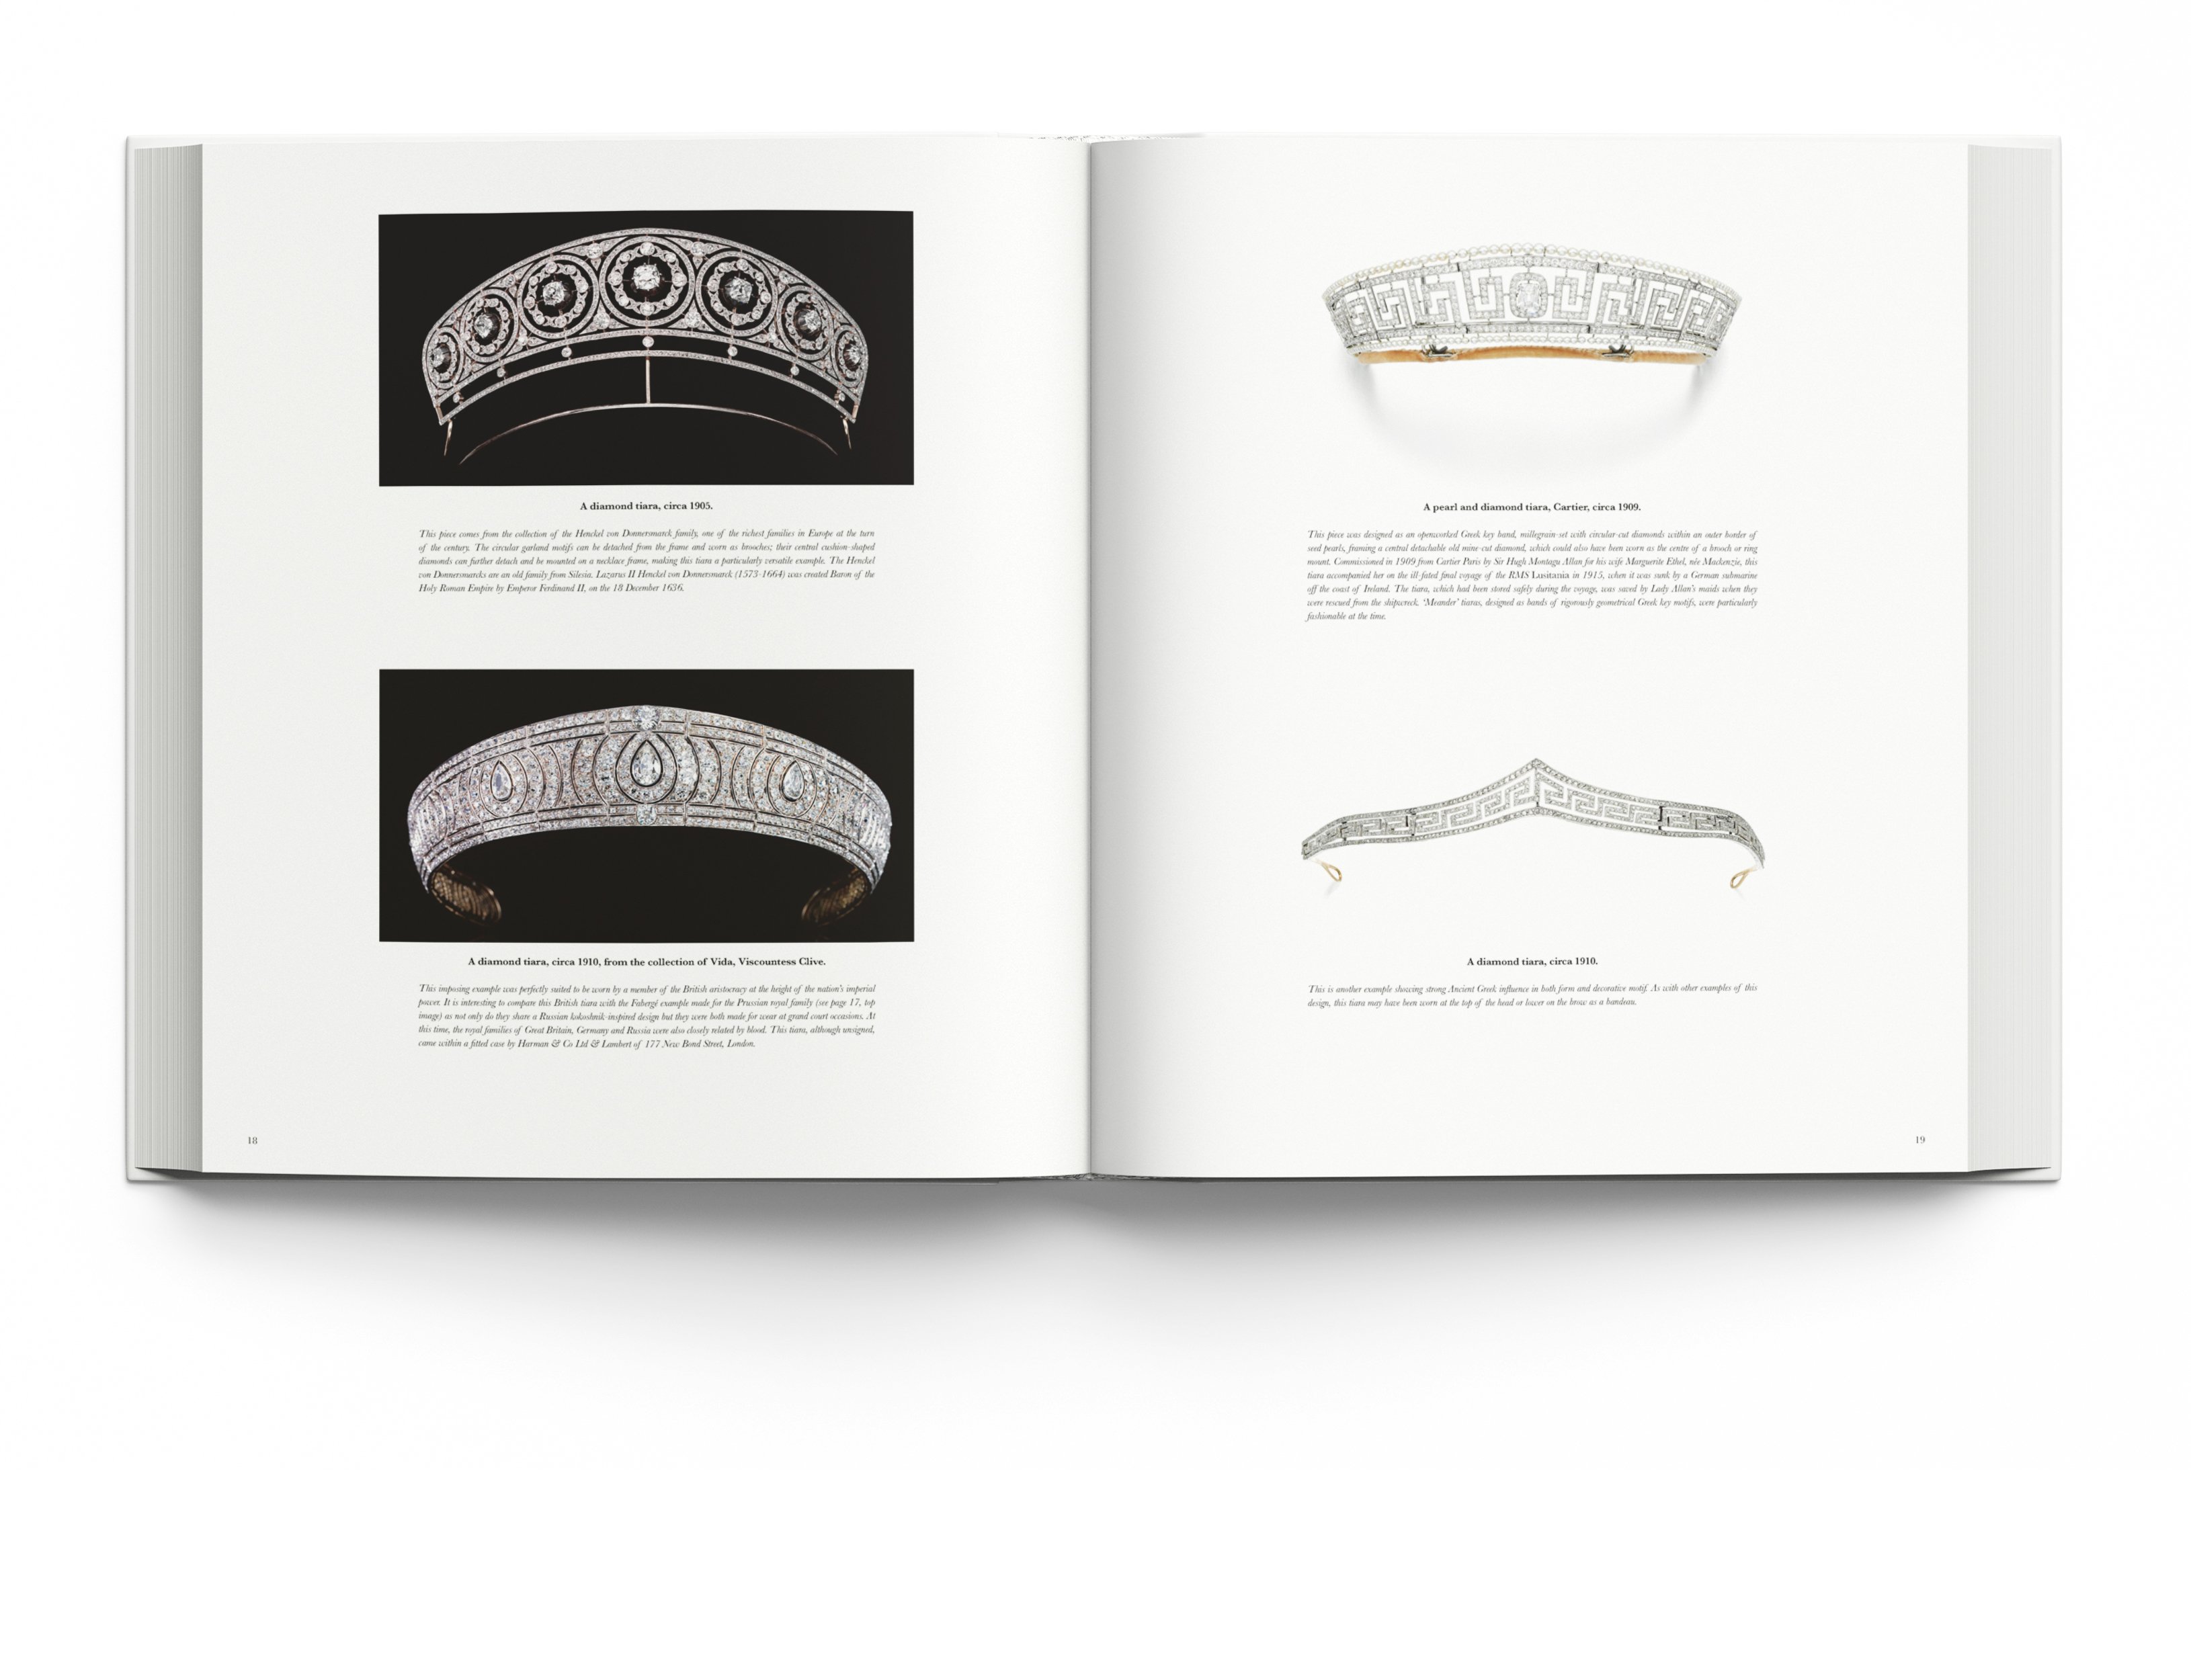 Luxury diamond and ruby jewelled bangles, on white cover of 'Understanding Jewellery, The 20th Century', by ACC Art Books.